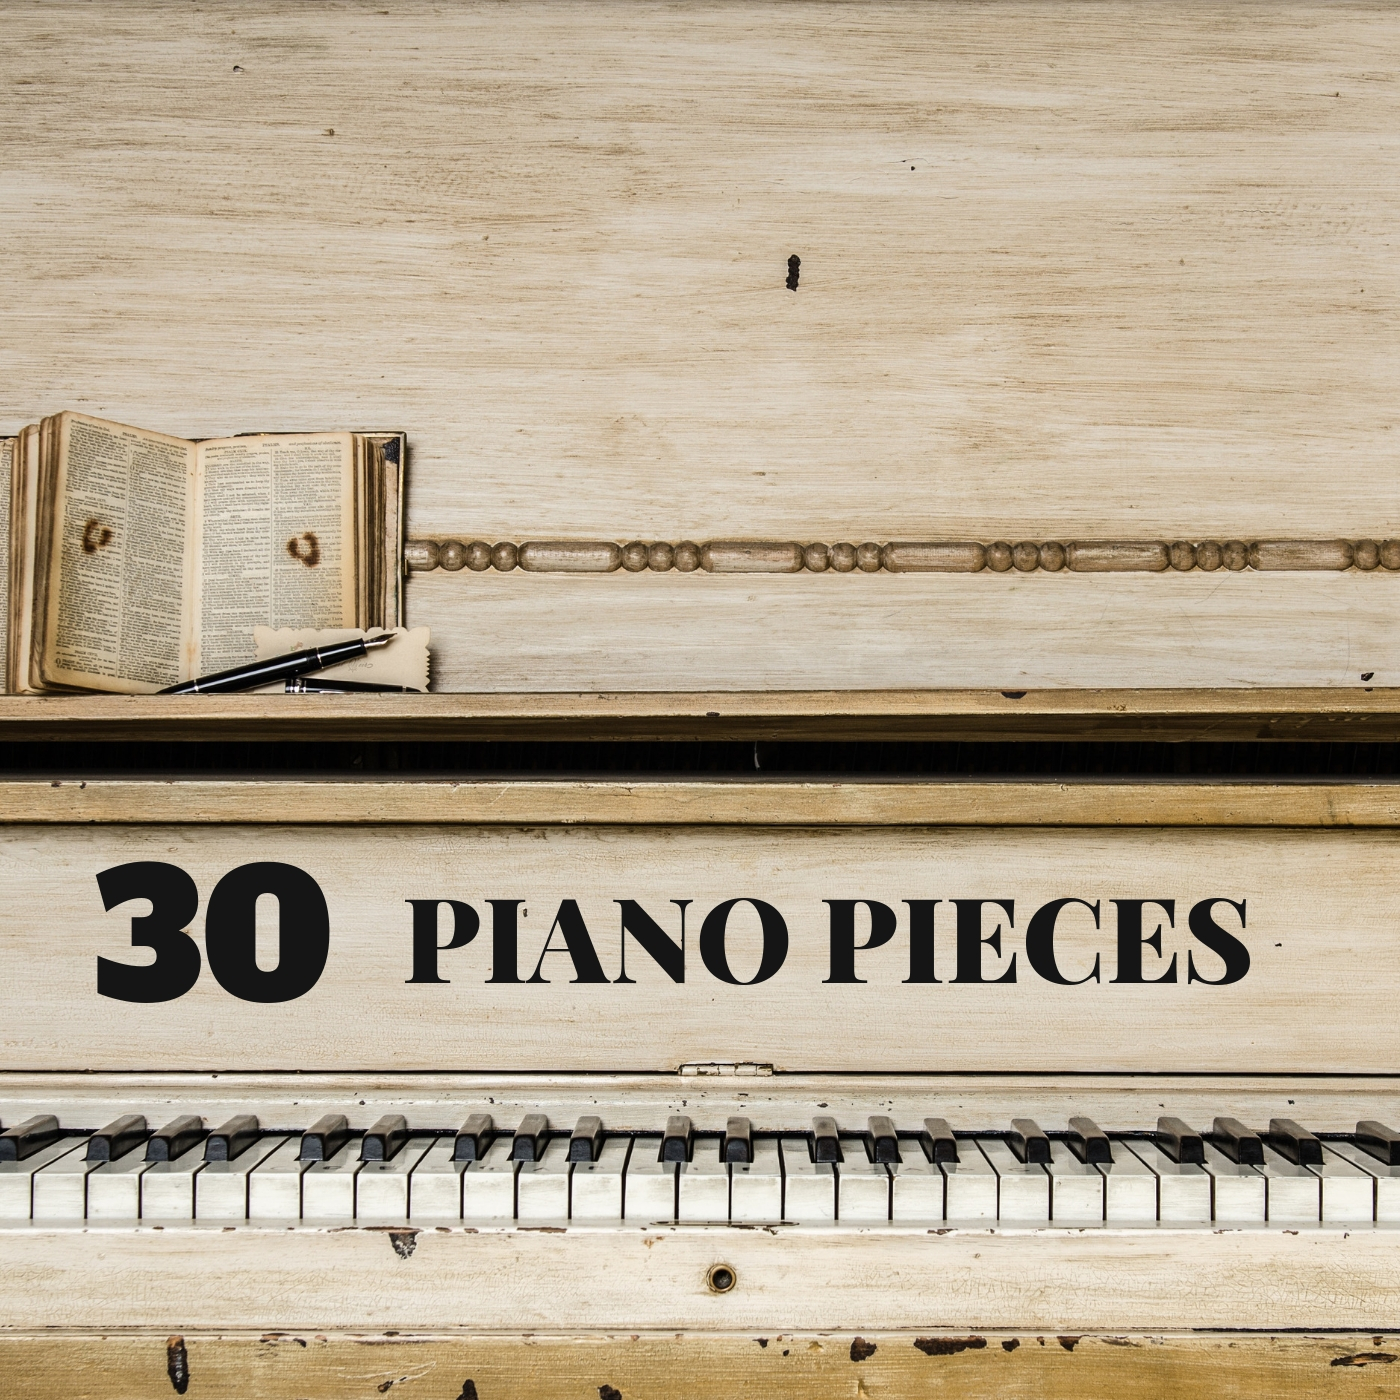 30 Most Famous Classical Piano Pieces